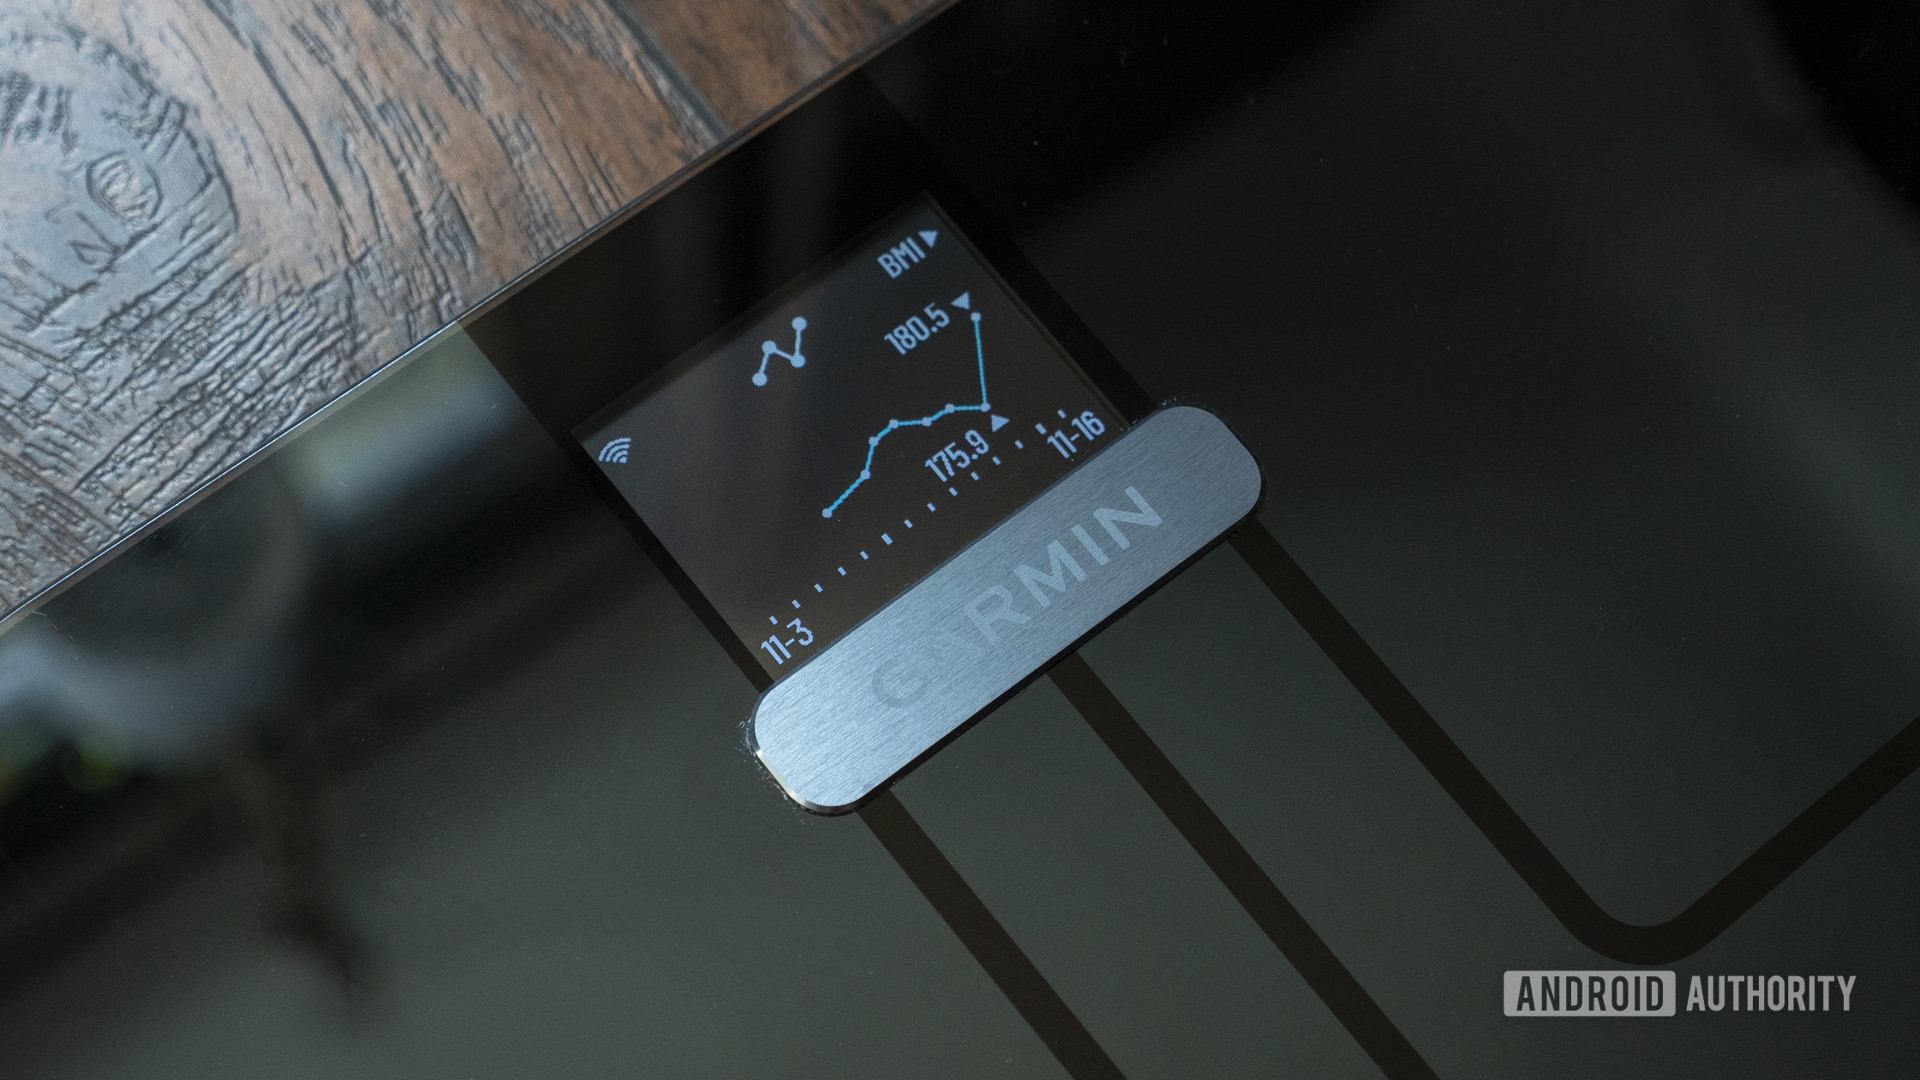 garmin index s2 smart scale review 30 day weight trend